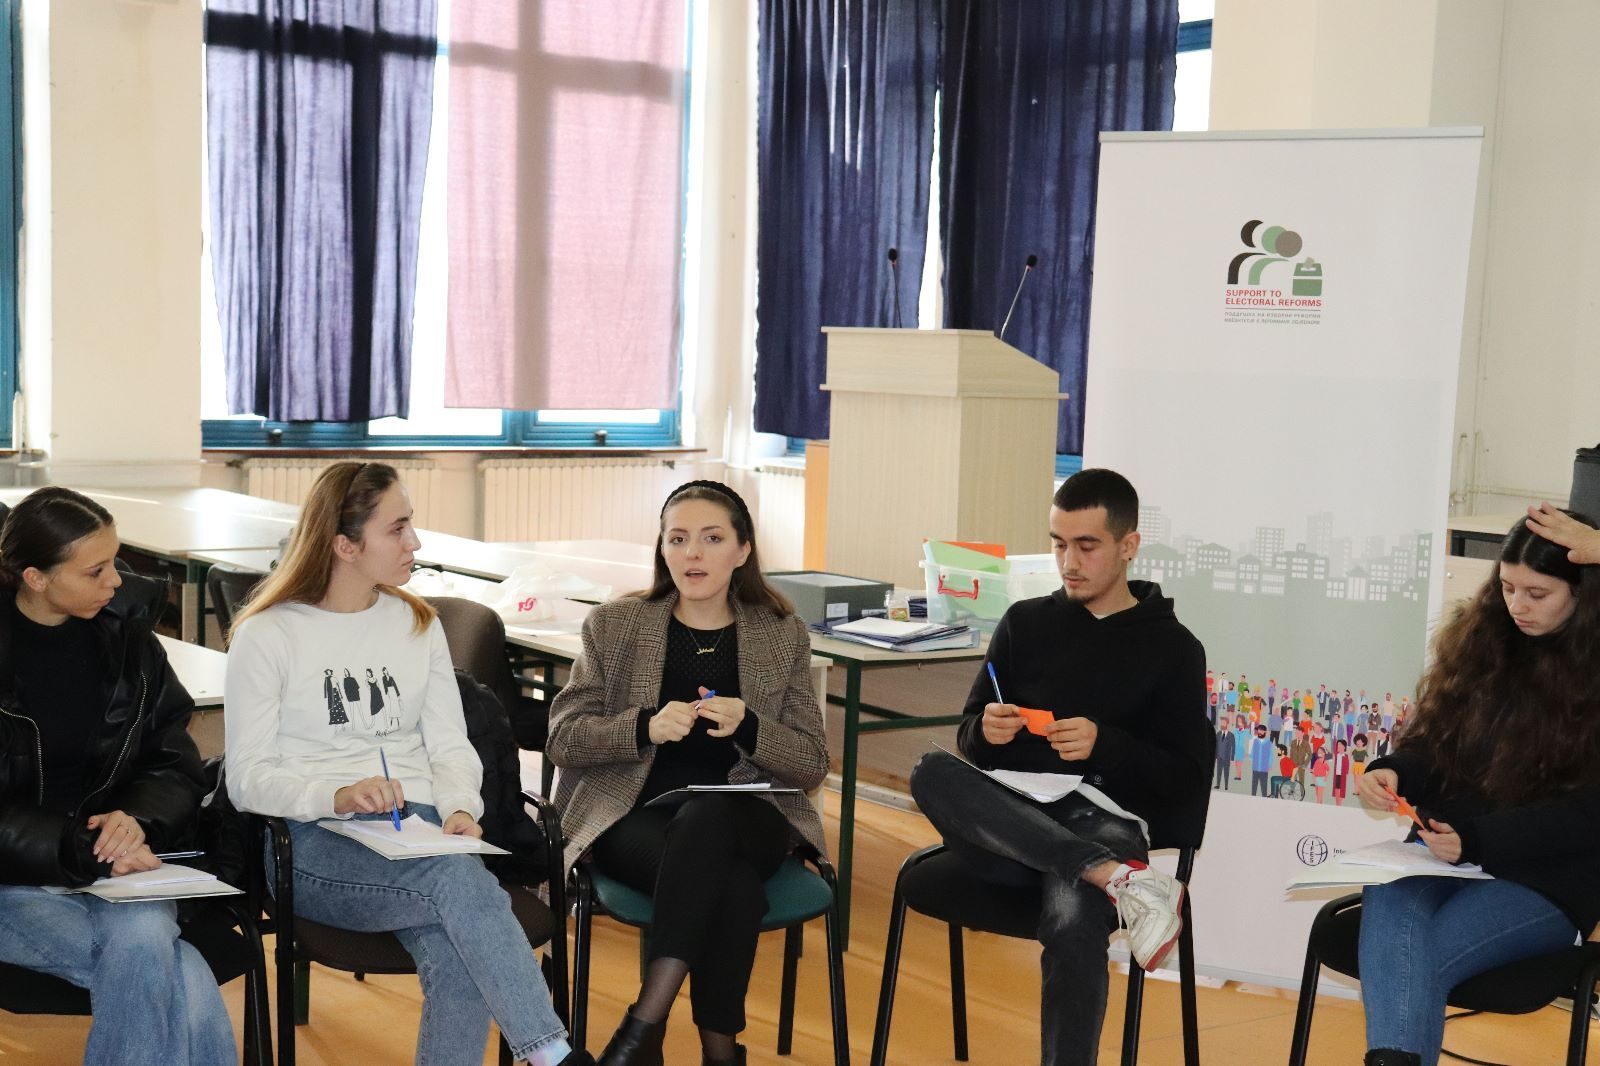 CED Tearce: Youth from Tetovo to detect and report environmental polluters